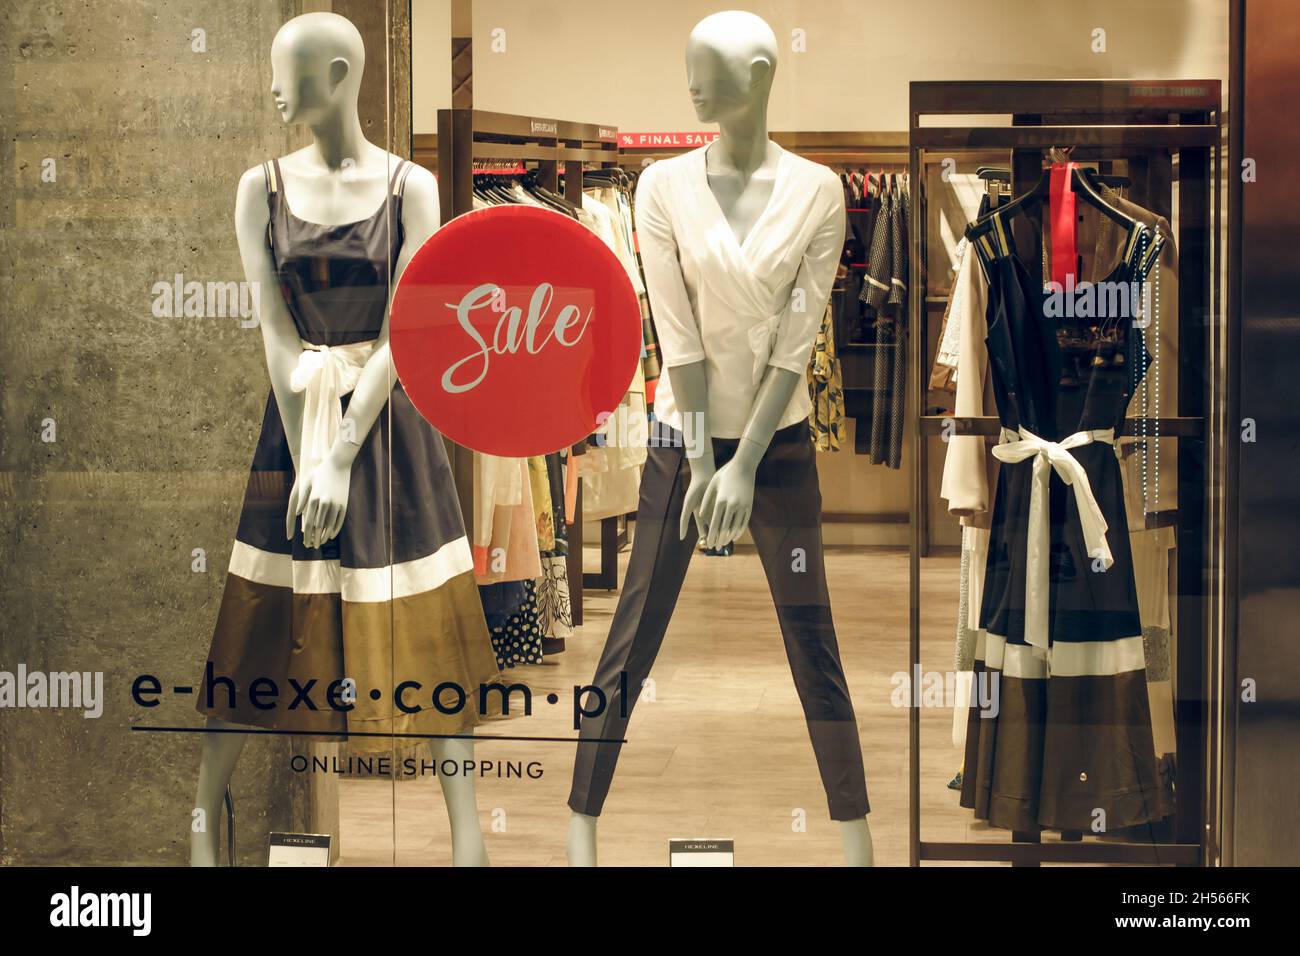 Page 20 - Clothing Store Dummy High Resolution Stock Photography and Images  - Alamy